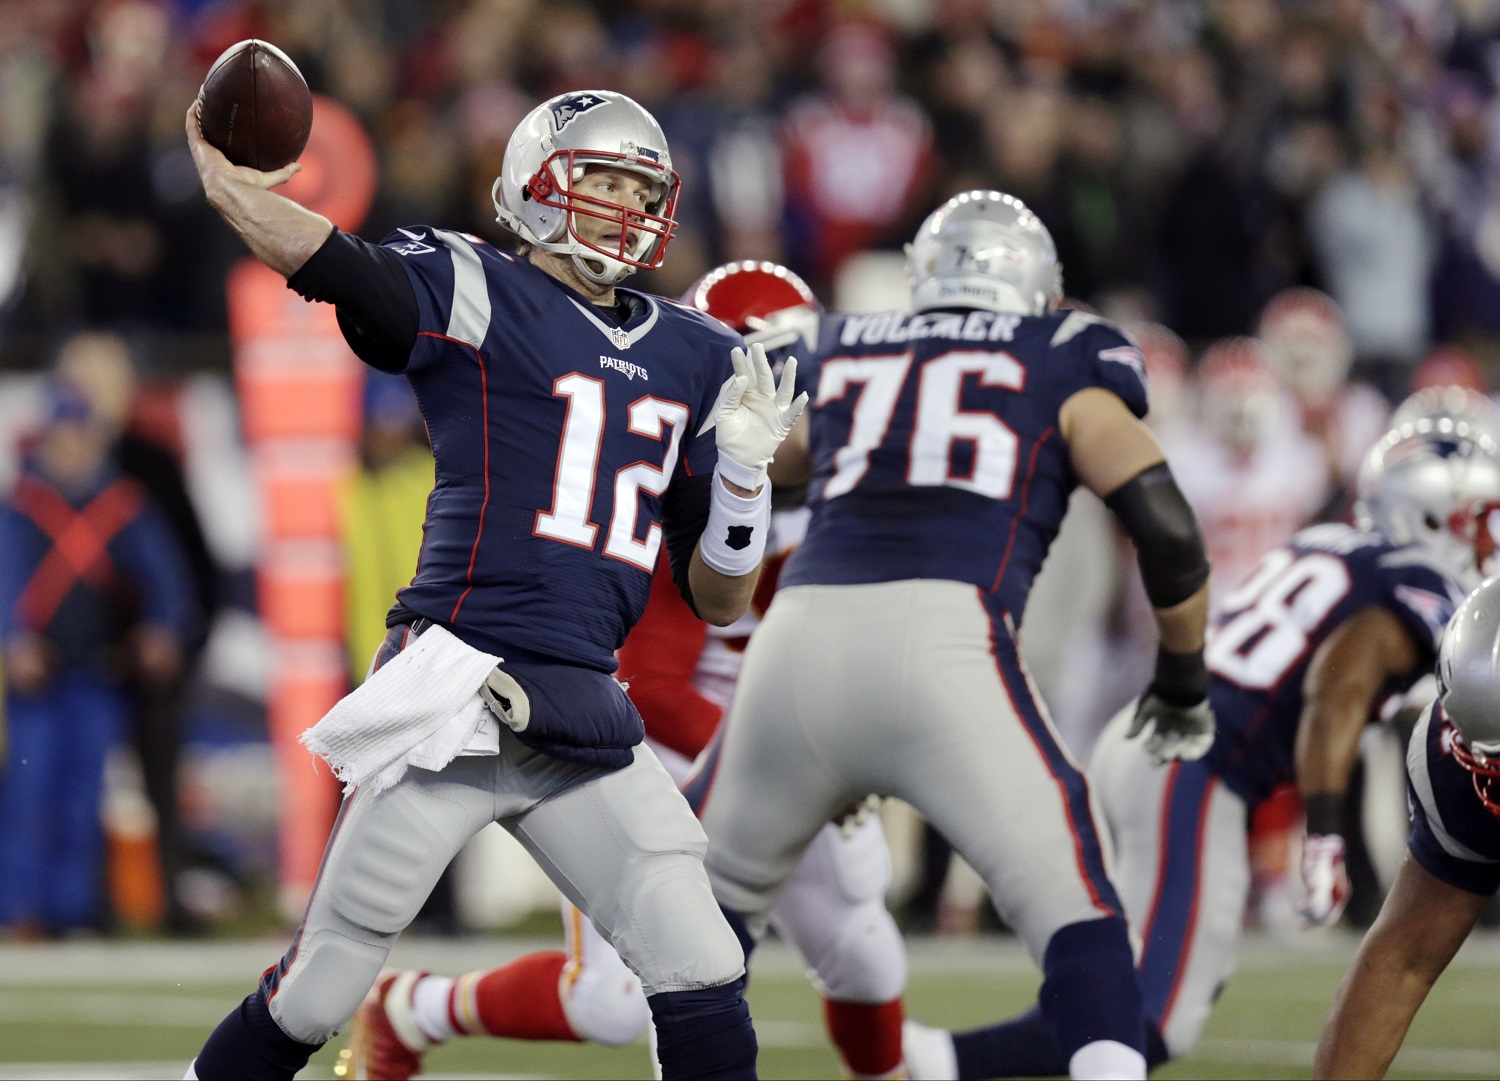 New England Patriots quarterback Tom Brady (12) passes against the Kansas City Chiefs in the first half of an NFL divisional playoff football game, Saturday, Jan. 16, 2016, in Foxborough, Mass. (AP Photo/Charles Krupa)